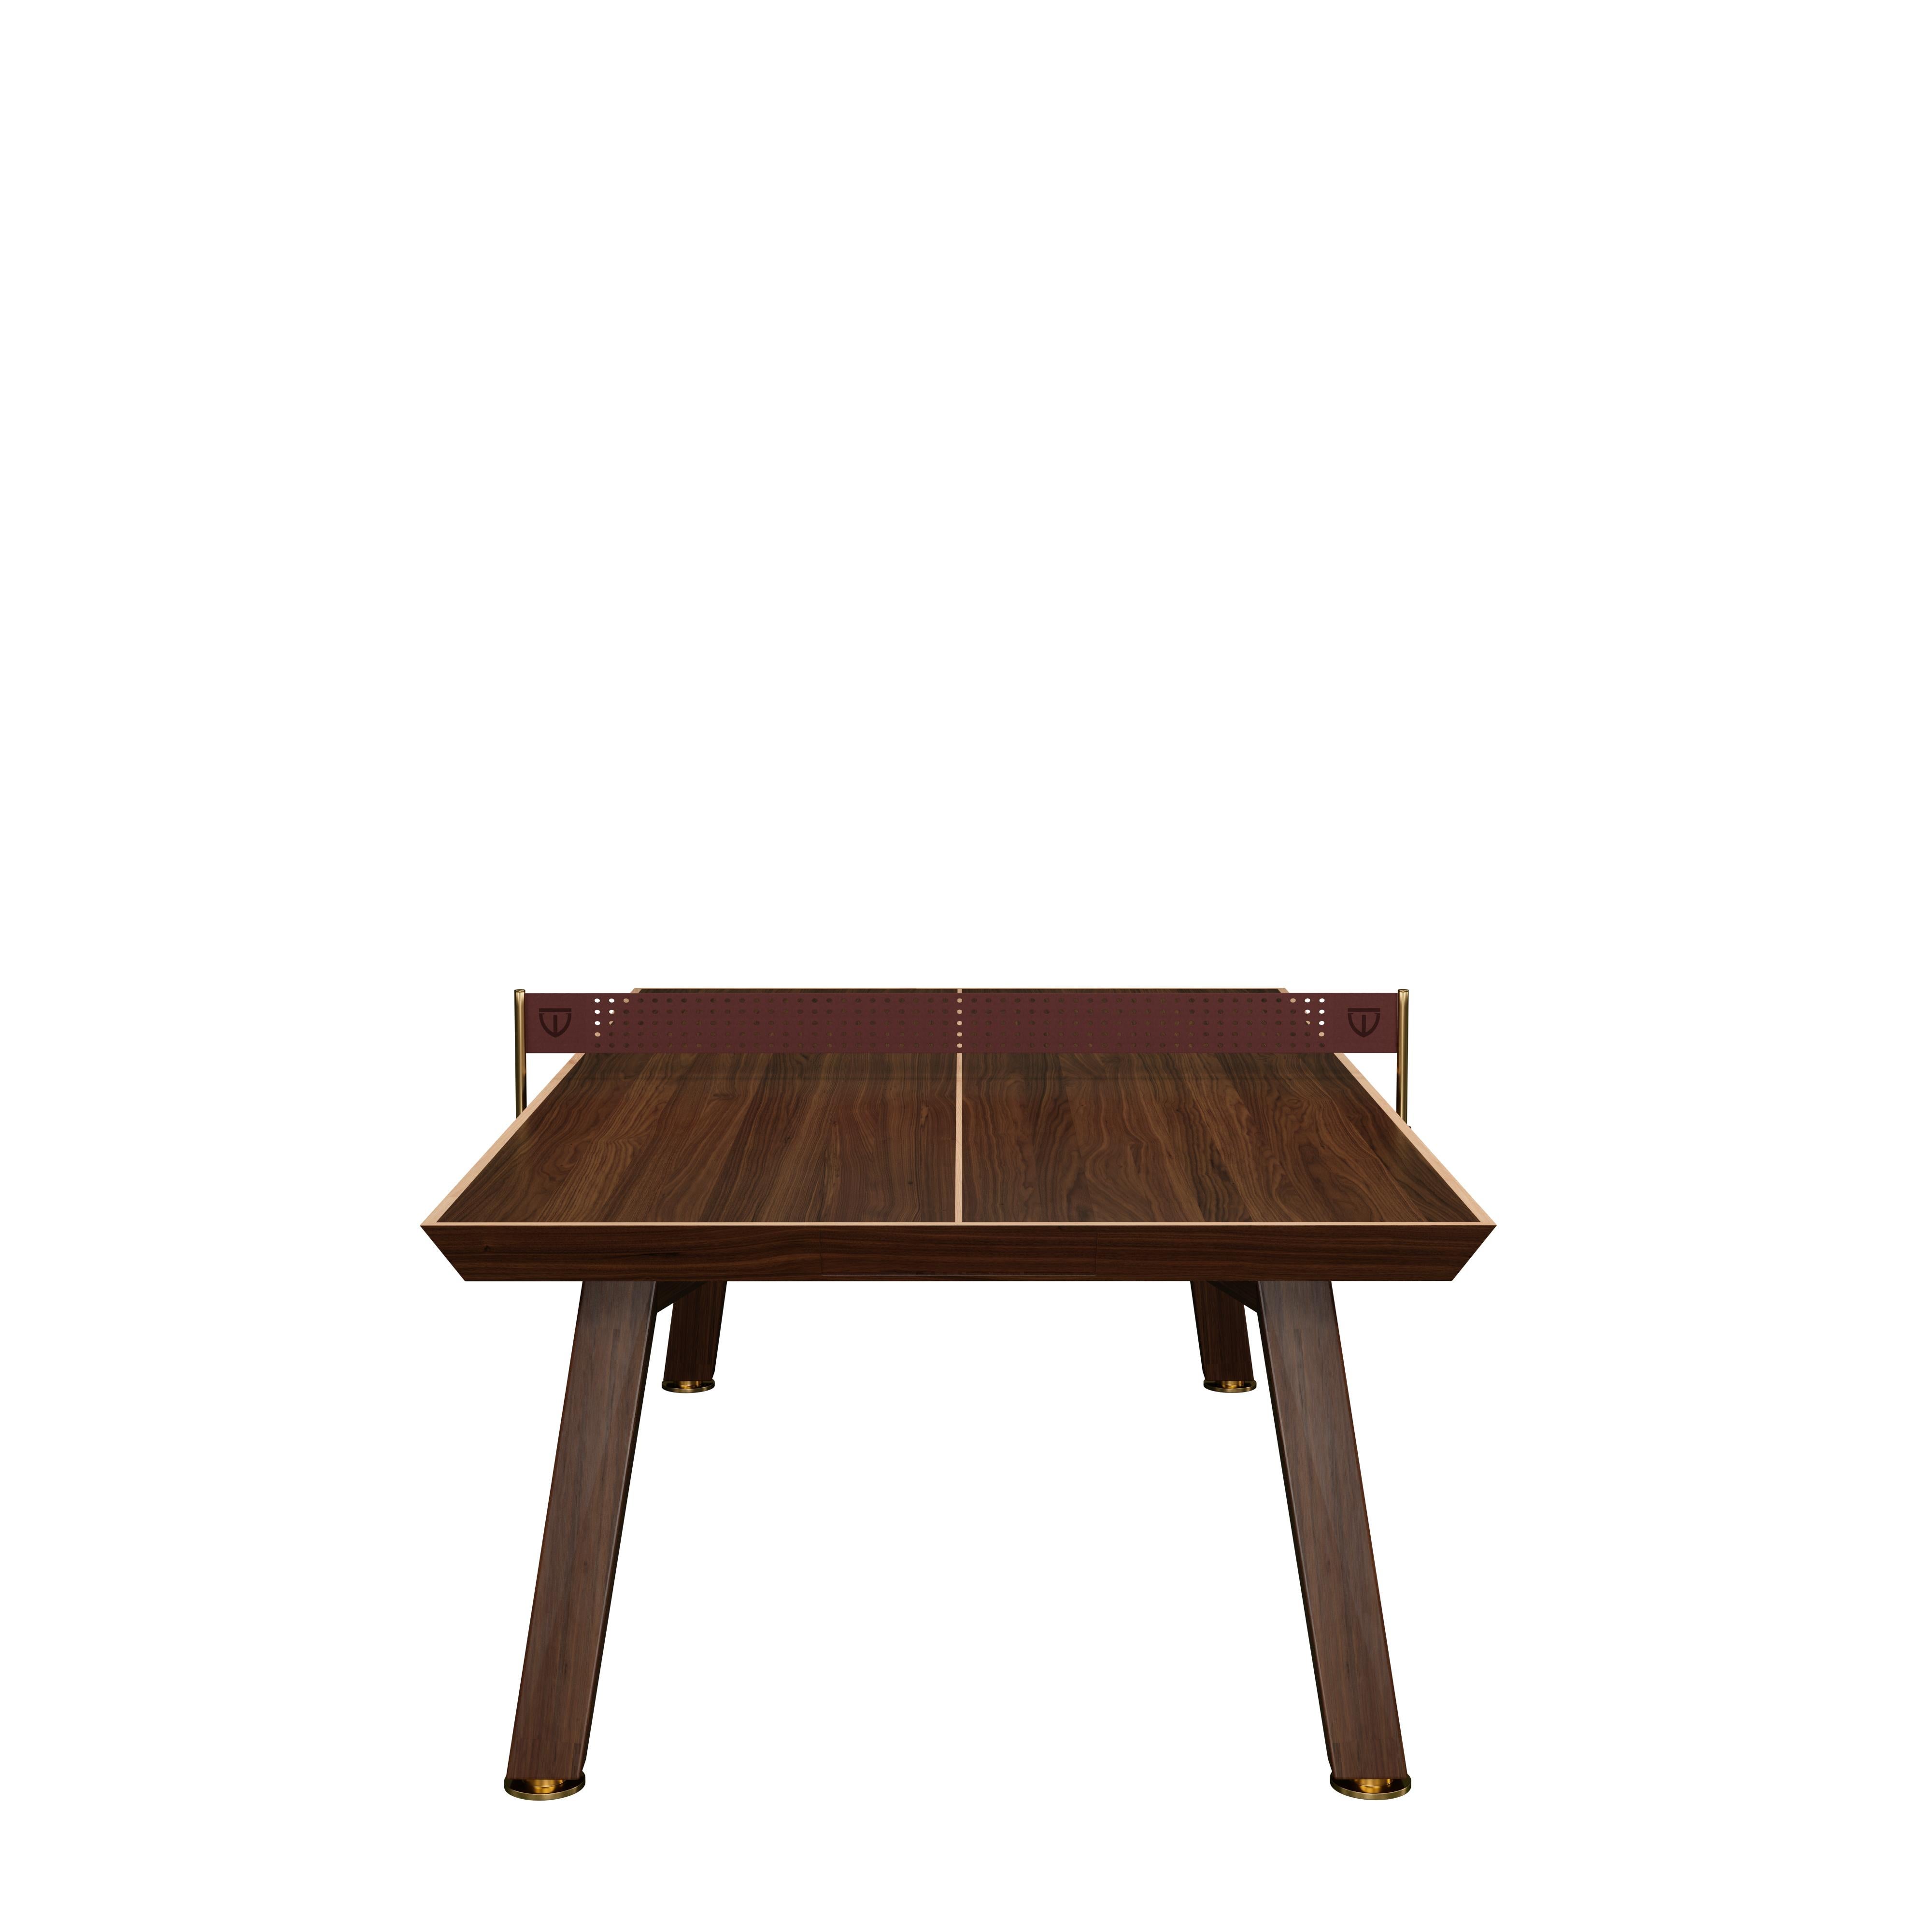 Portuguese 21st Century Keppel Ping Pong Table Walnut Wood Leather Oak For Sale